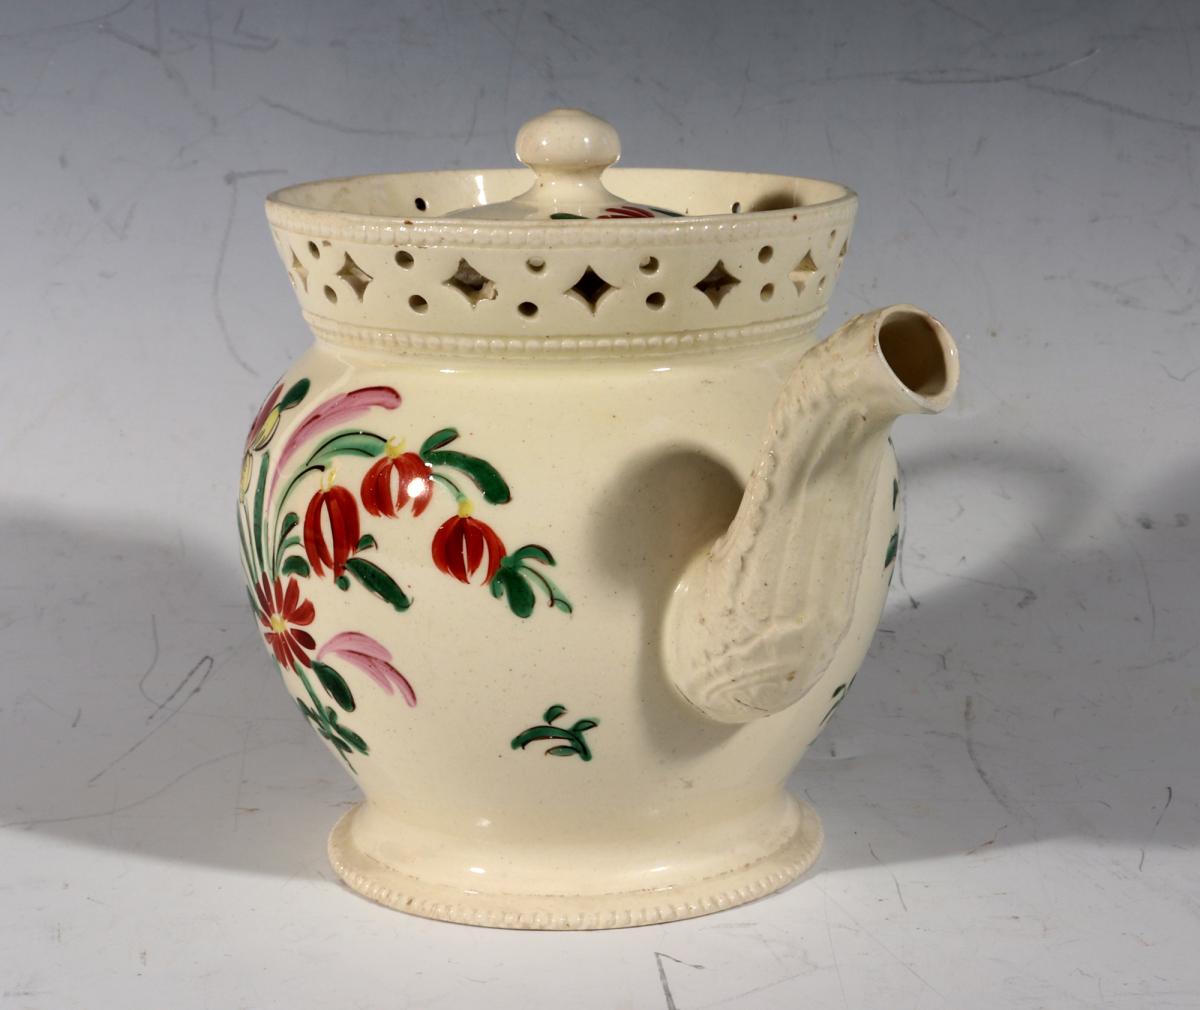 Creamware Chinoiserie Teapot and Cover with Openwork Gallery